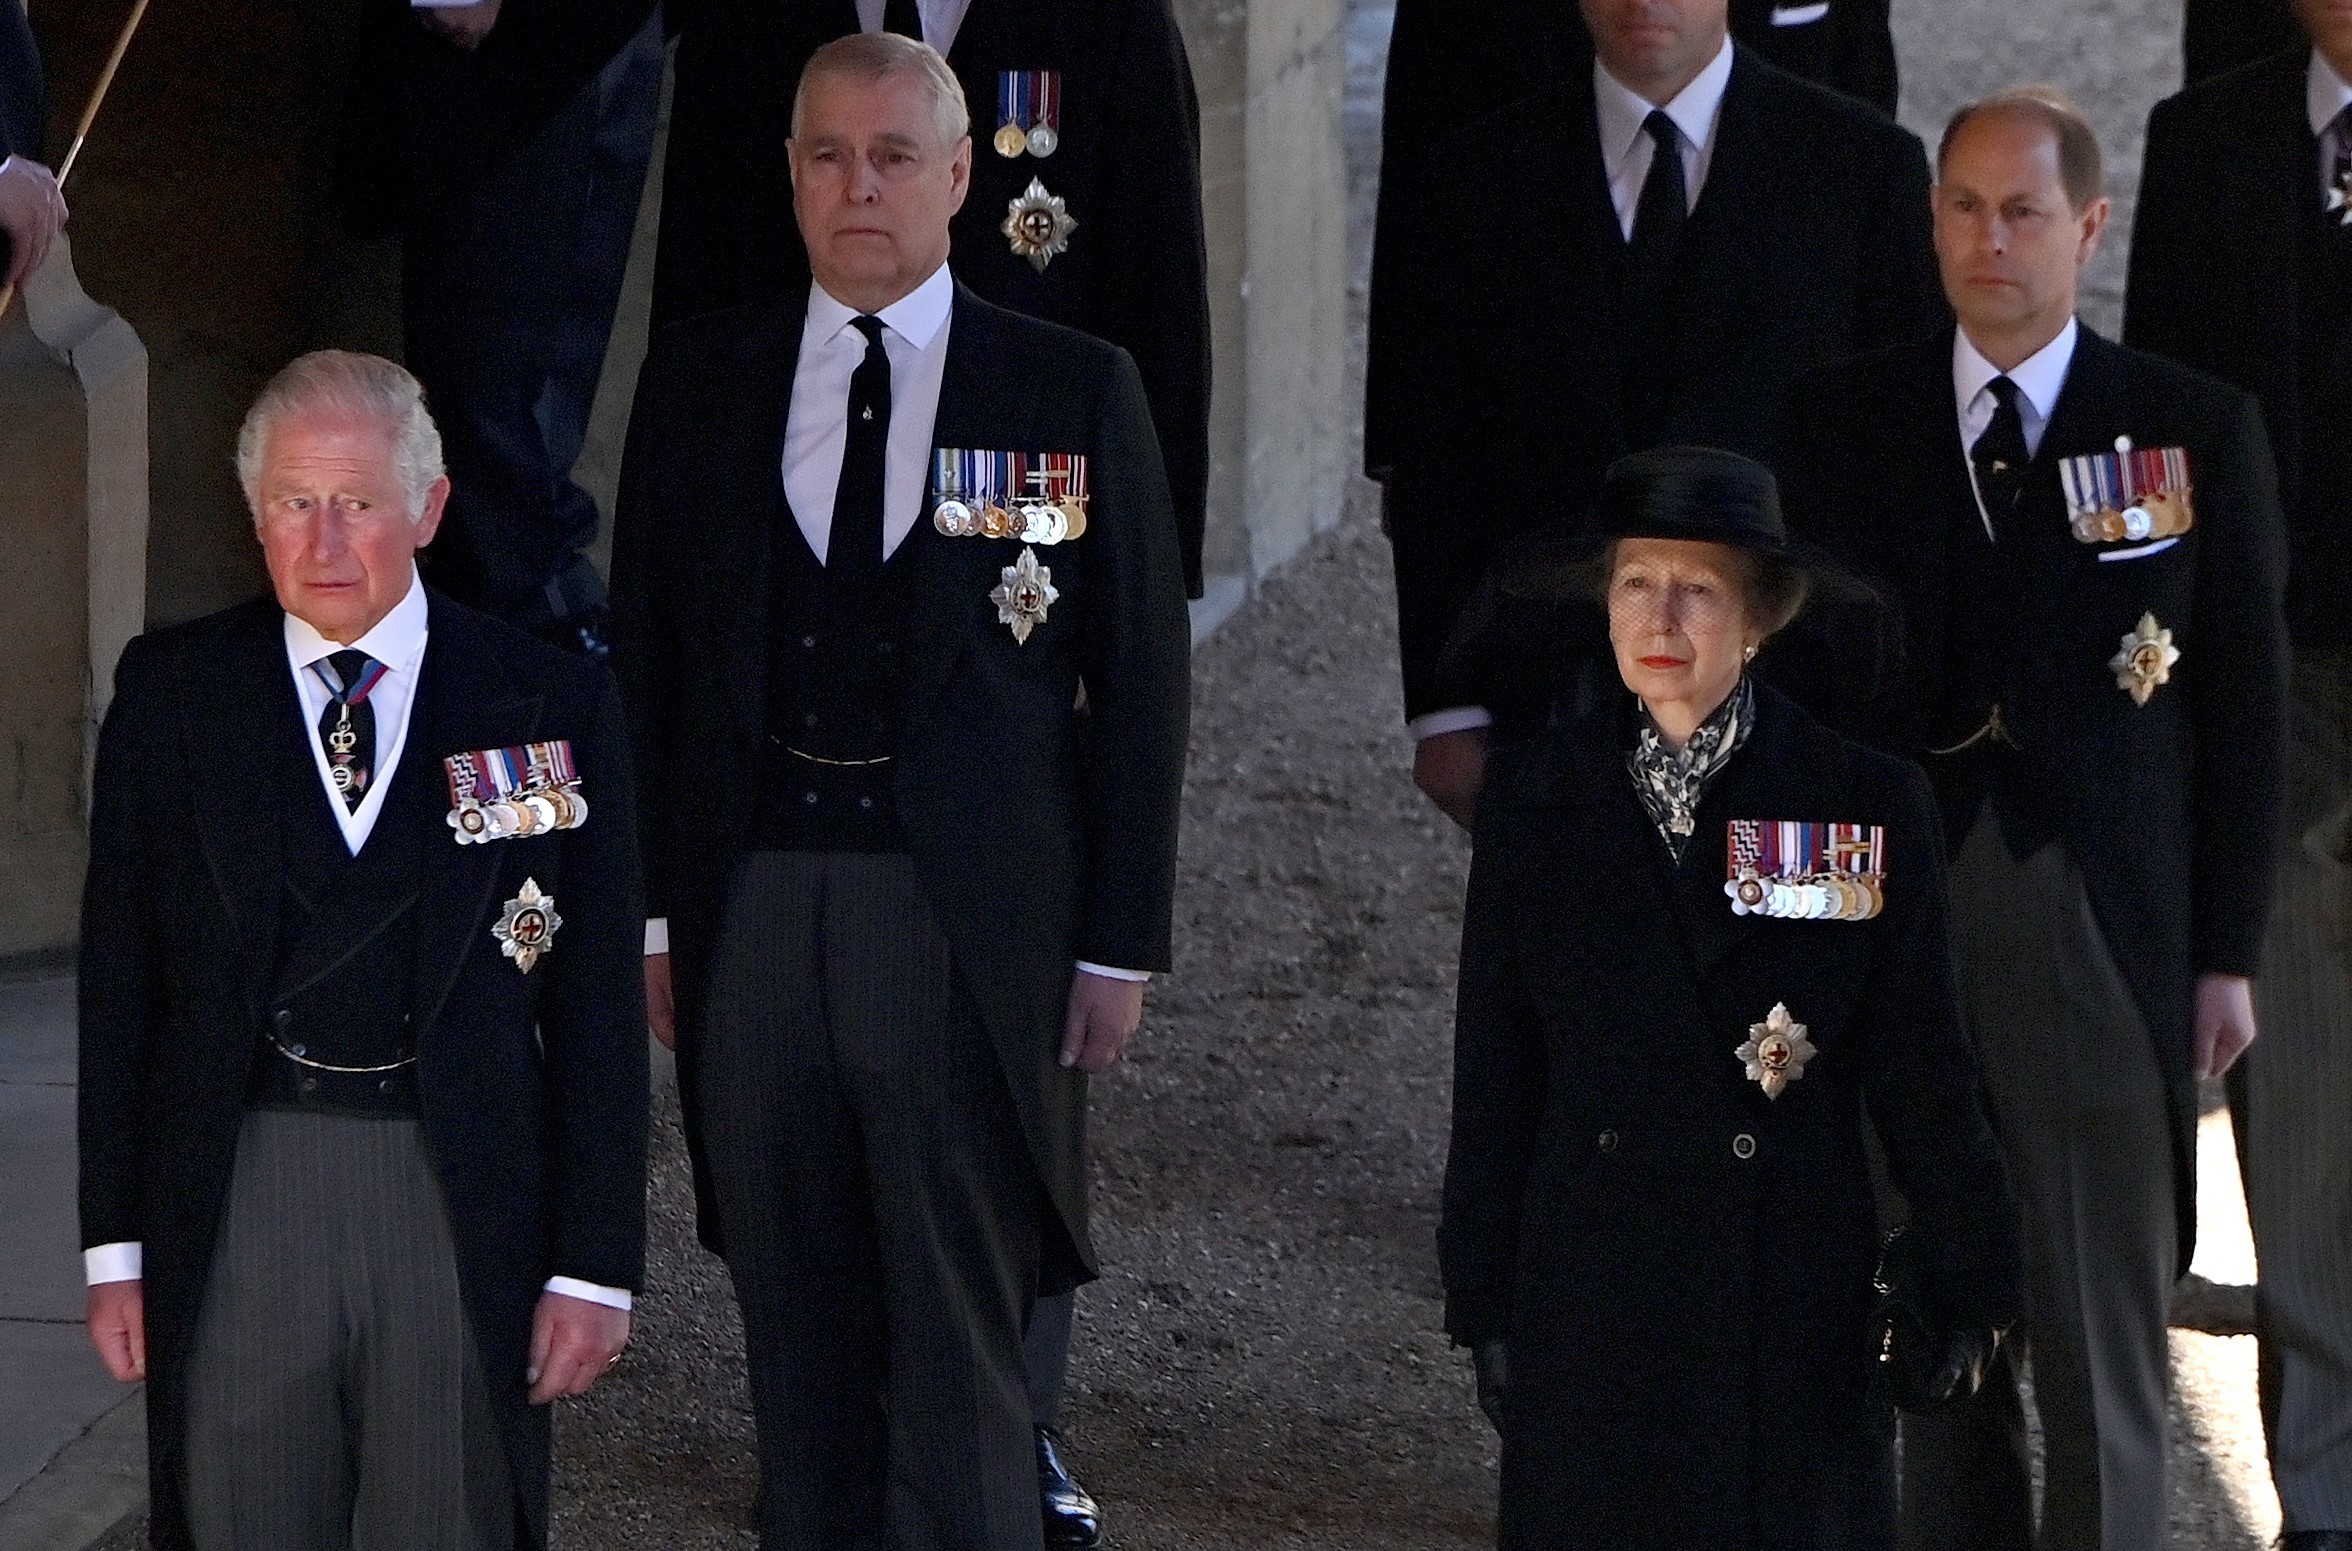 Prince Charles, Princess Anne, Prince Andrew, and Prince Edward follow Prince Philip's coffin